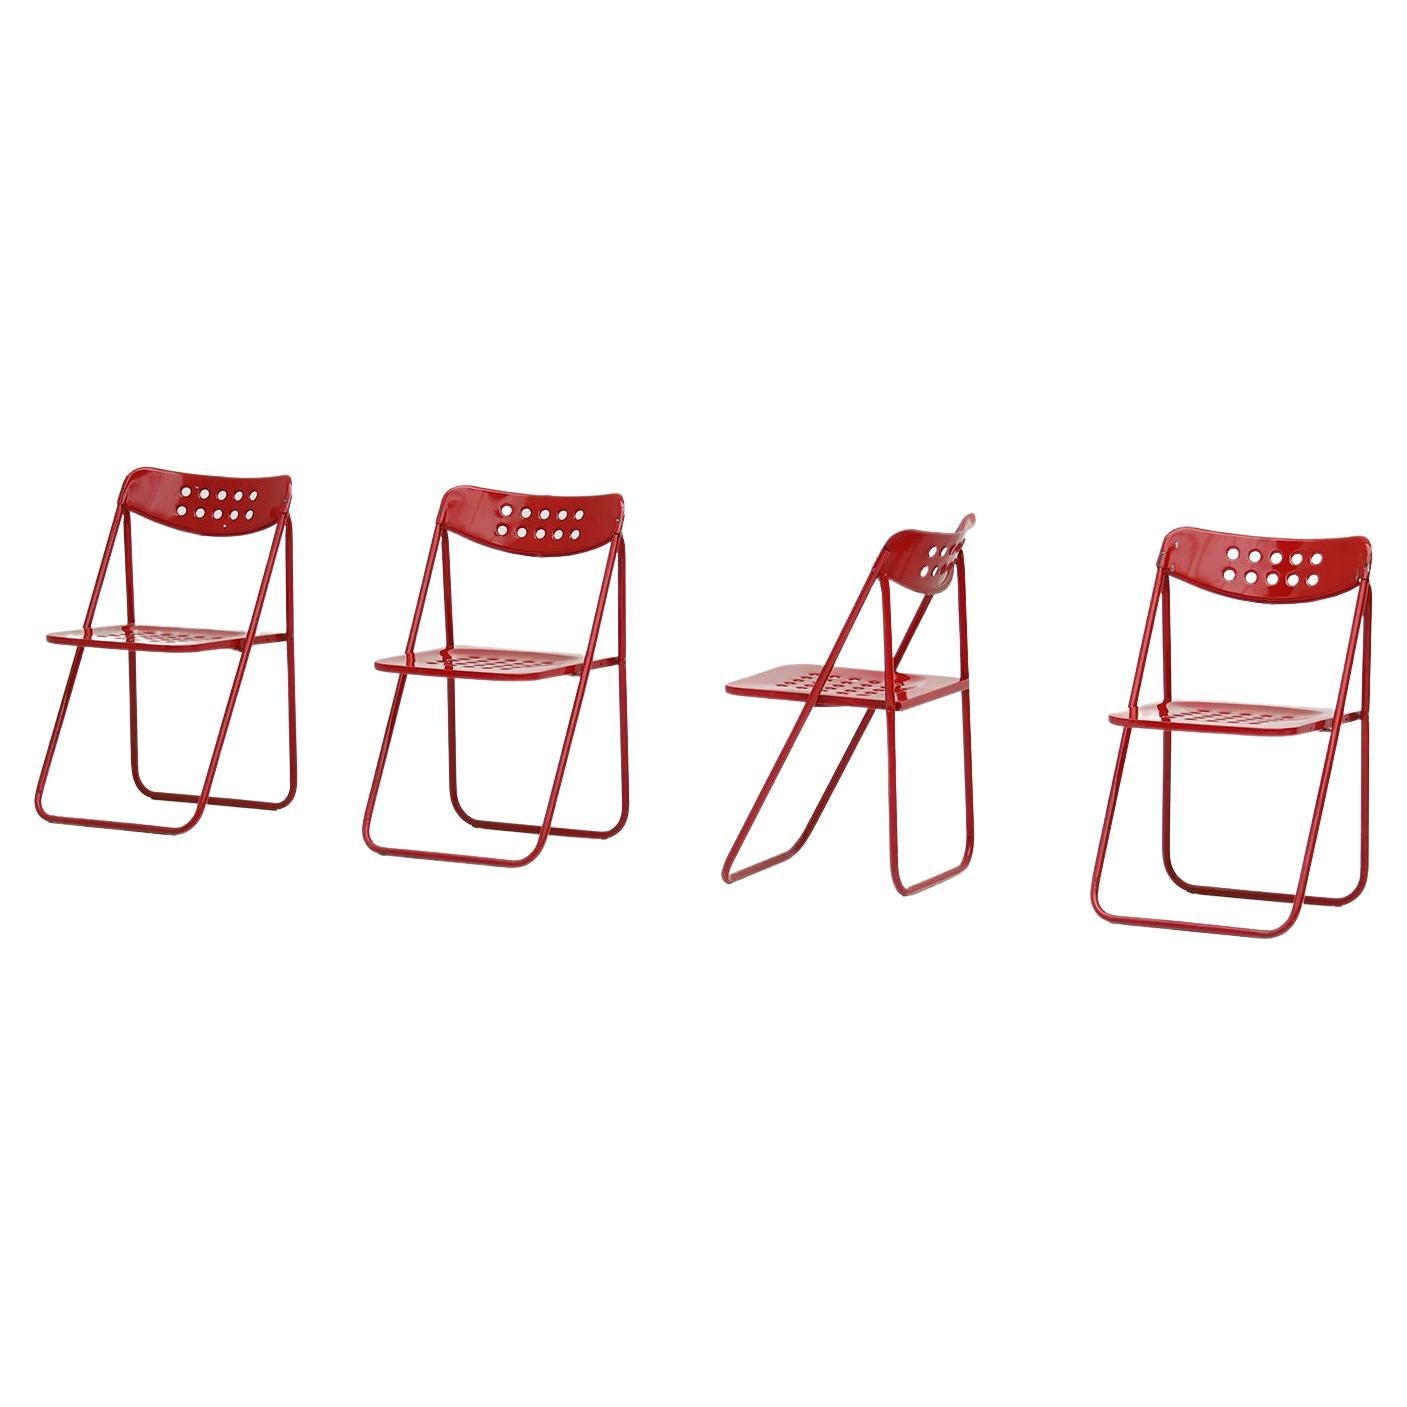 Set of Four Modern Red Lacquered Metal Folding Chairs 1980s